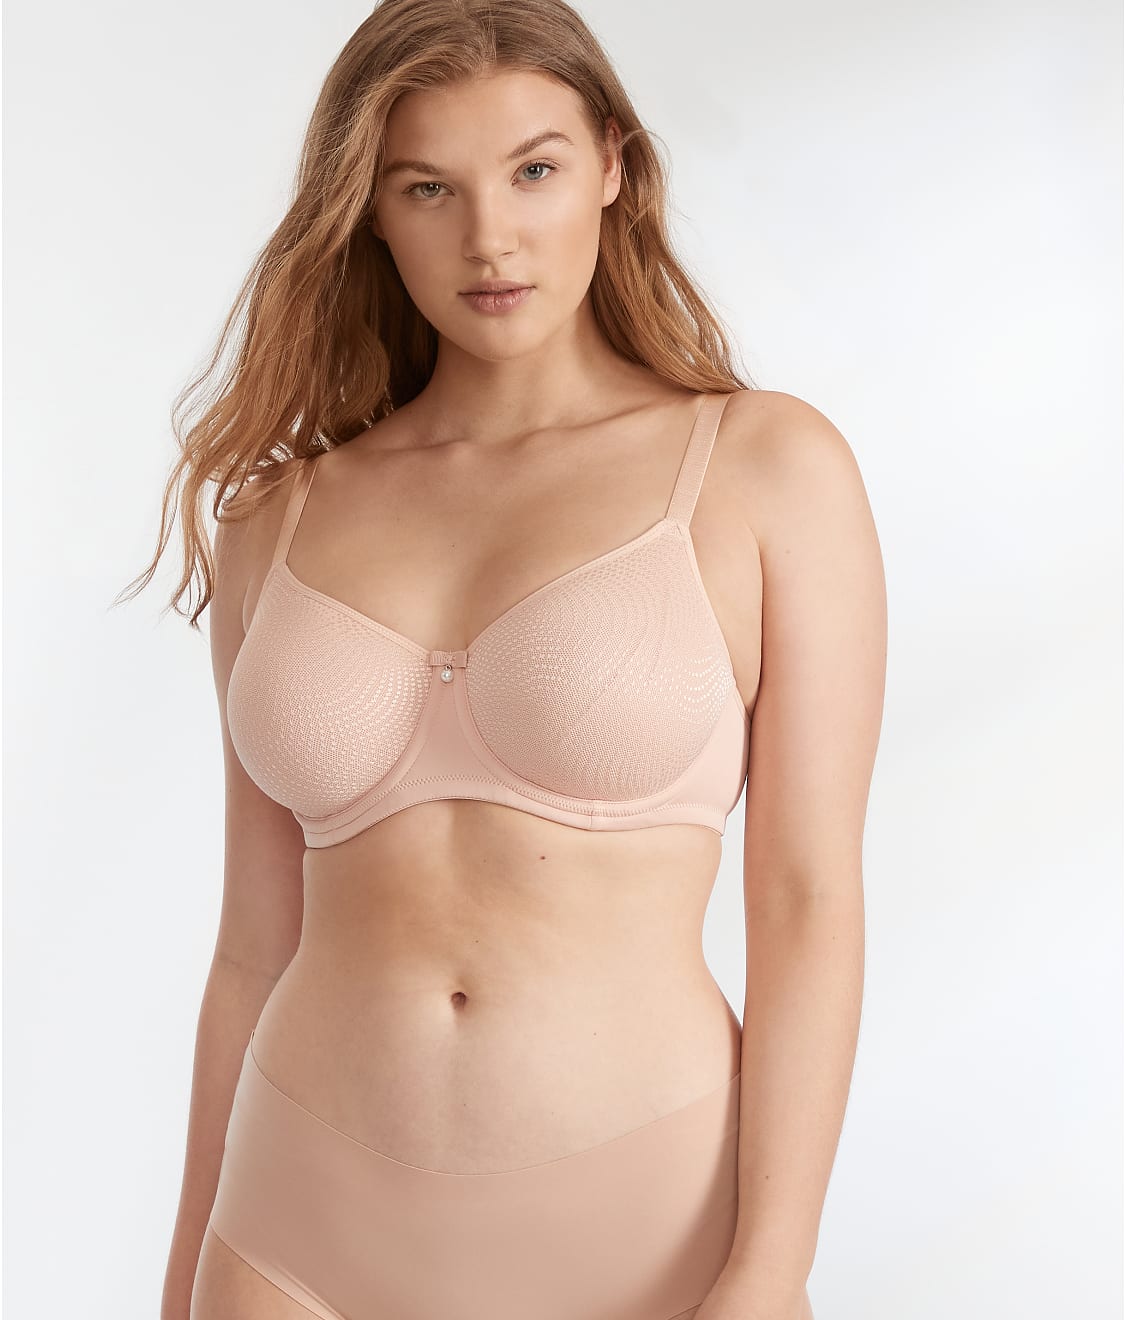 Have you tried our brand-new seamless minimizer? Pearl is as functiona